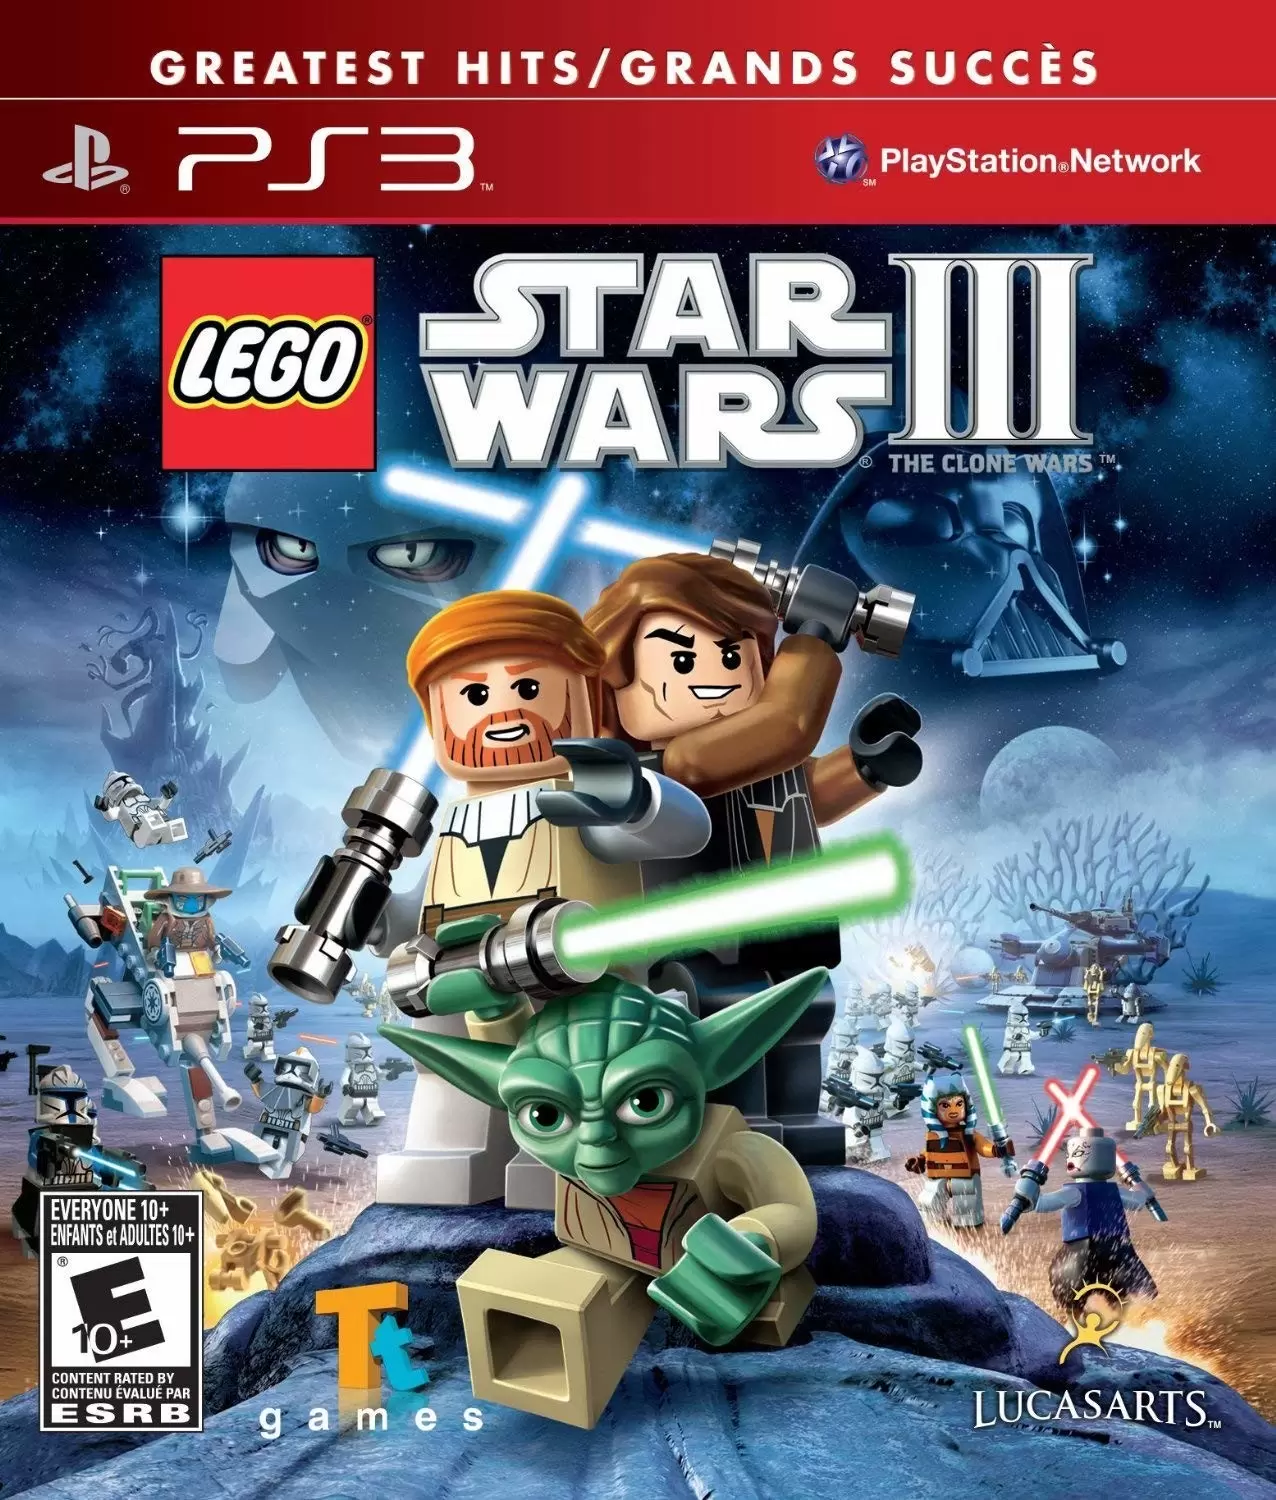 PS3 Games - LEGO Star Wars  3 Greatest Hits